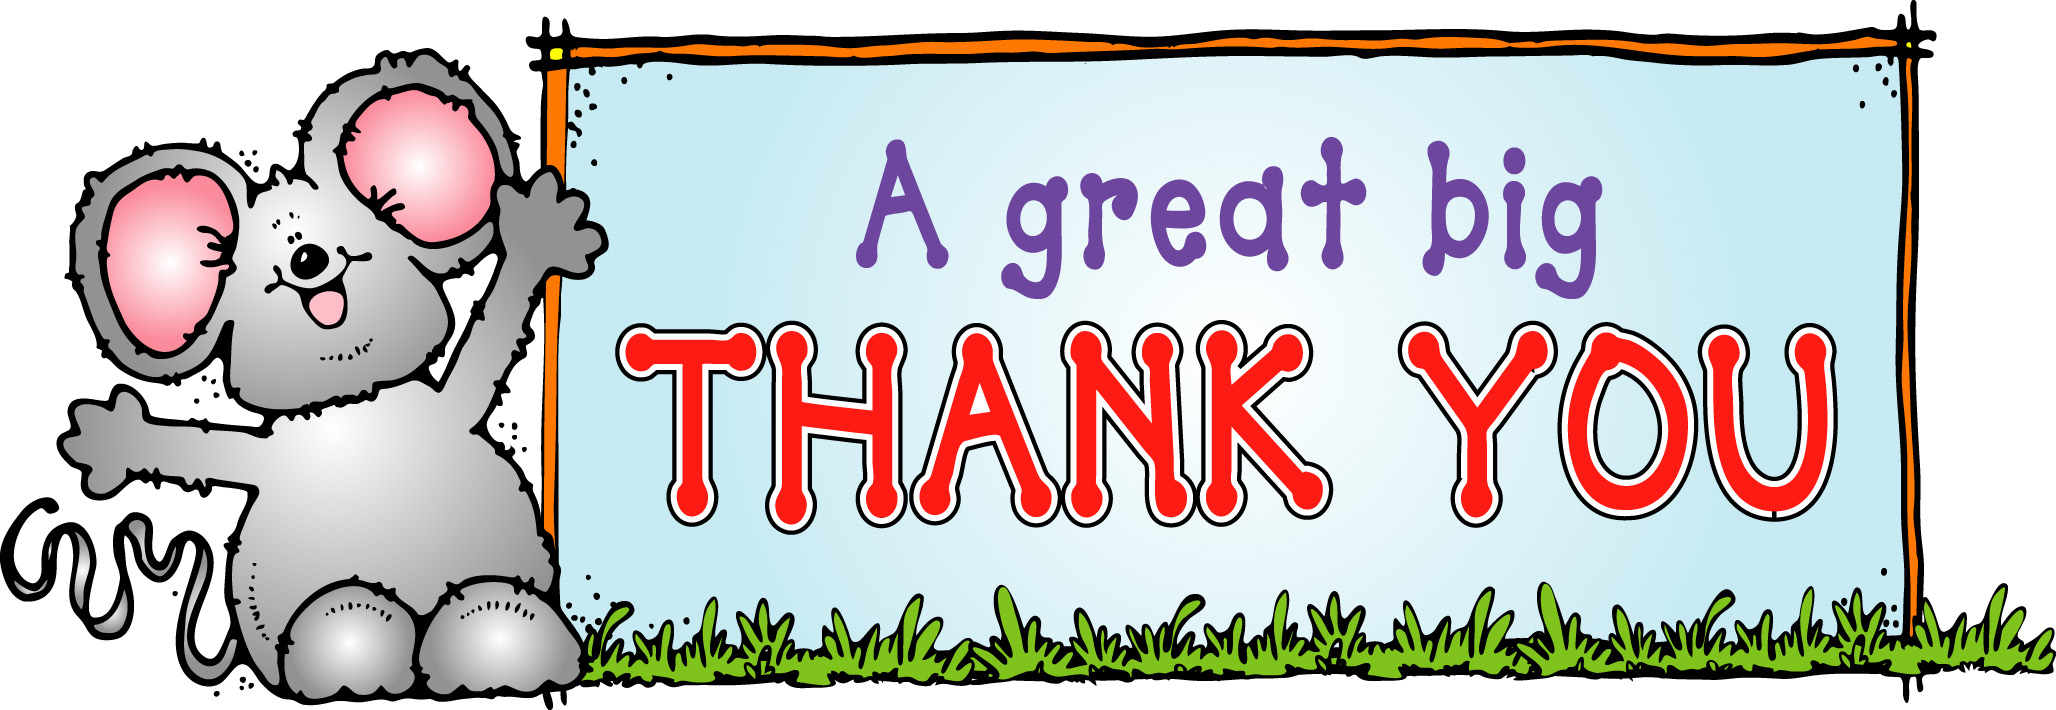 free online thank you clipart - photo #7